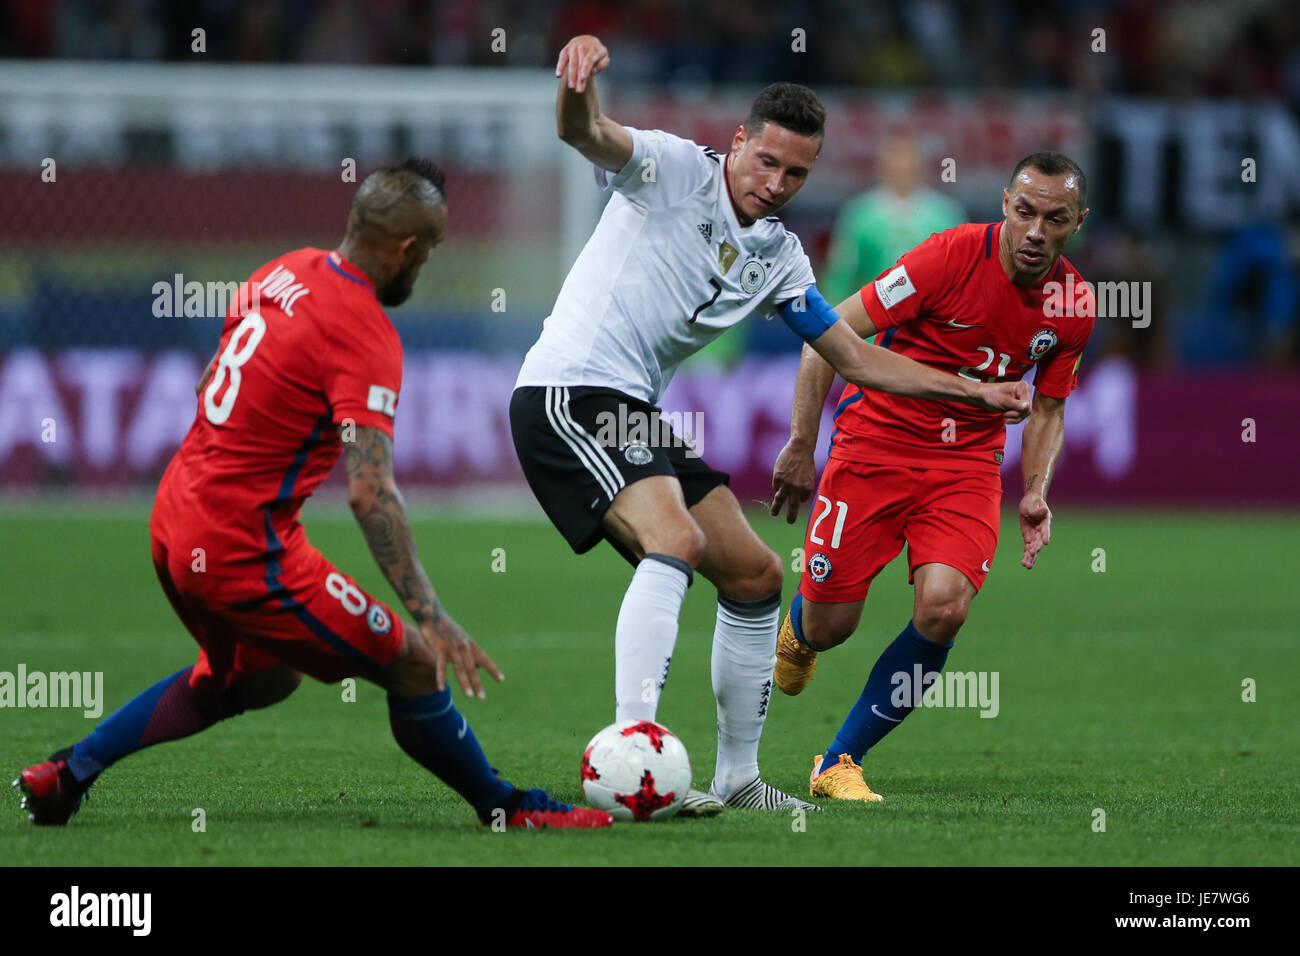 Kazan, Russia. 22nd June, 2017. Julian Draxler (C)of Germany vies with Arturo Vidal (L), Marcelo Diaz of Chile during group B match between Germany and Chile at the 2017 FIFA Confederations Cup in Kazan, Russia, on June 22, 2017. The match ended with a draw 1-1. Credit: Bai Xueqi/Xinhua/Alamy Live News Stock Photo